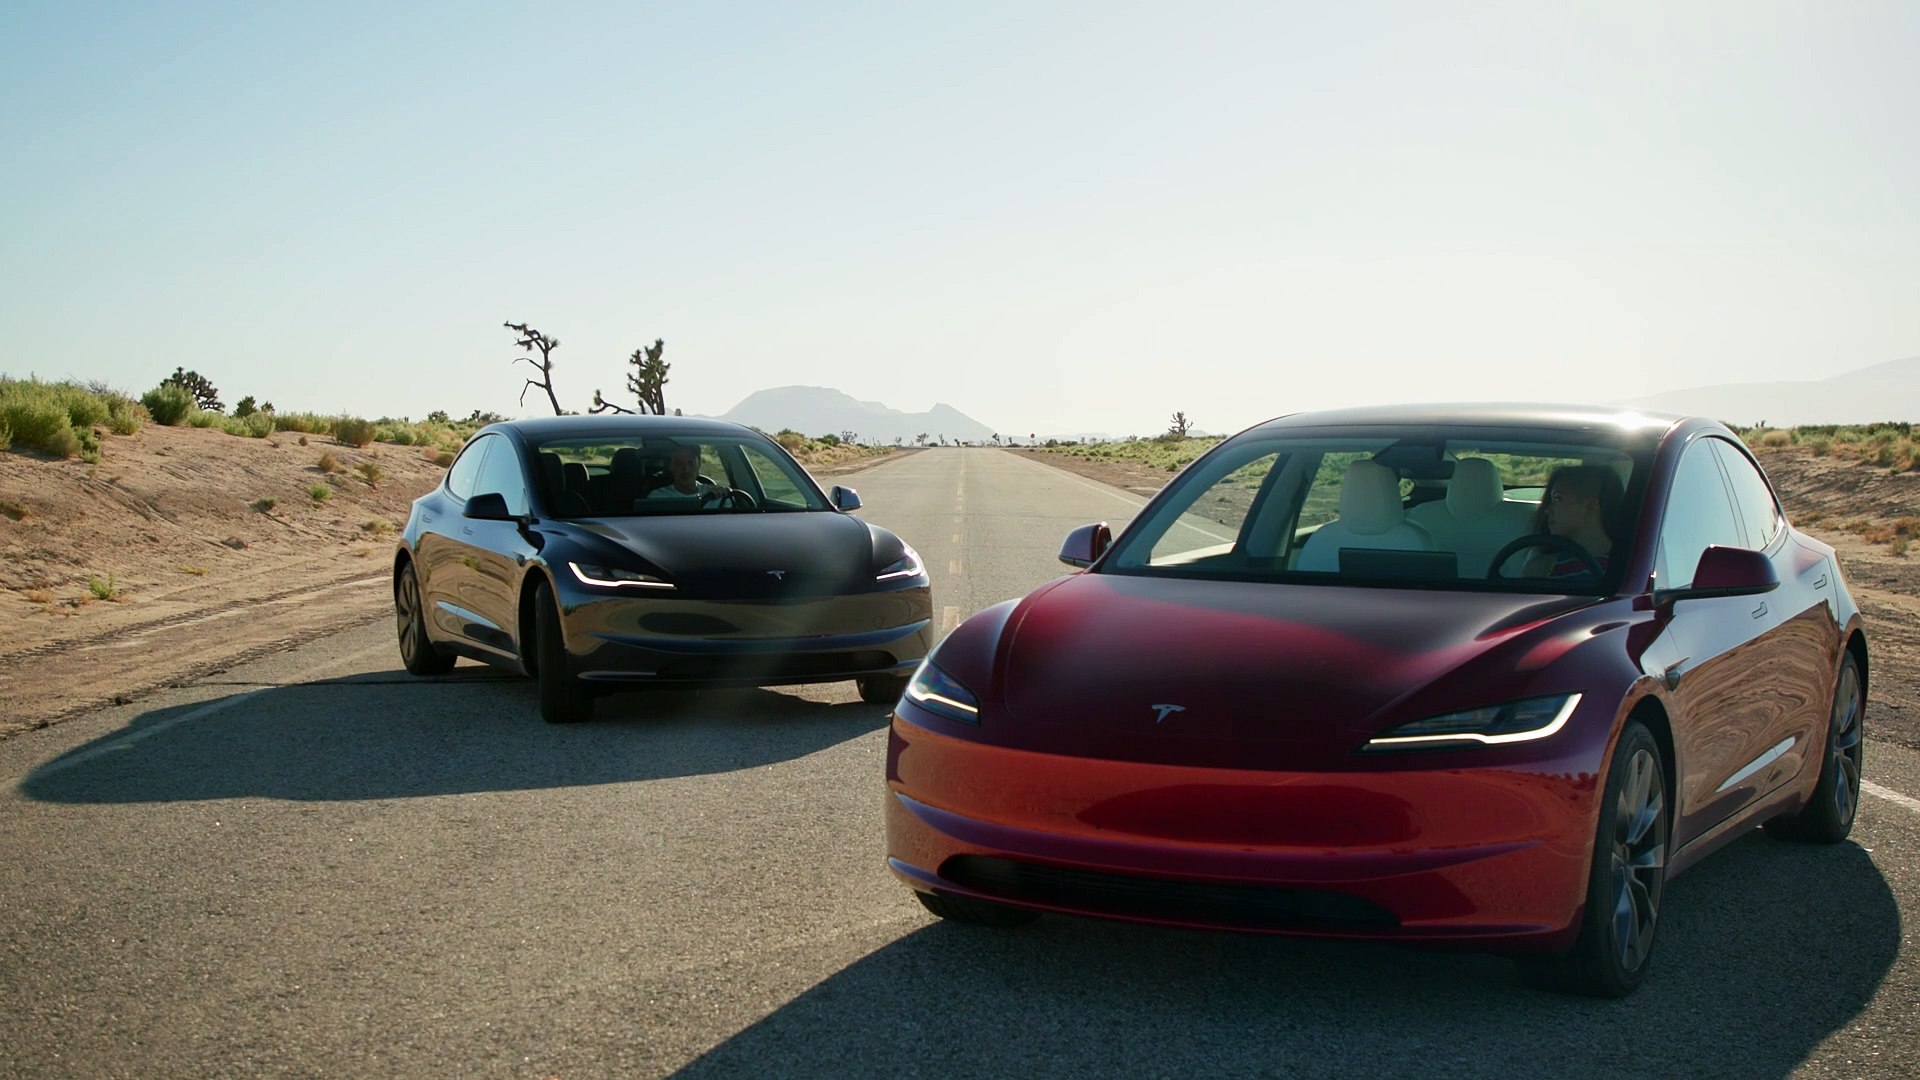 Tesla Model 3 Highland Update Coming Soon, According to Insiders